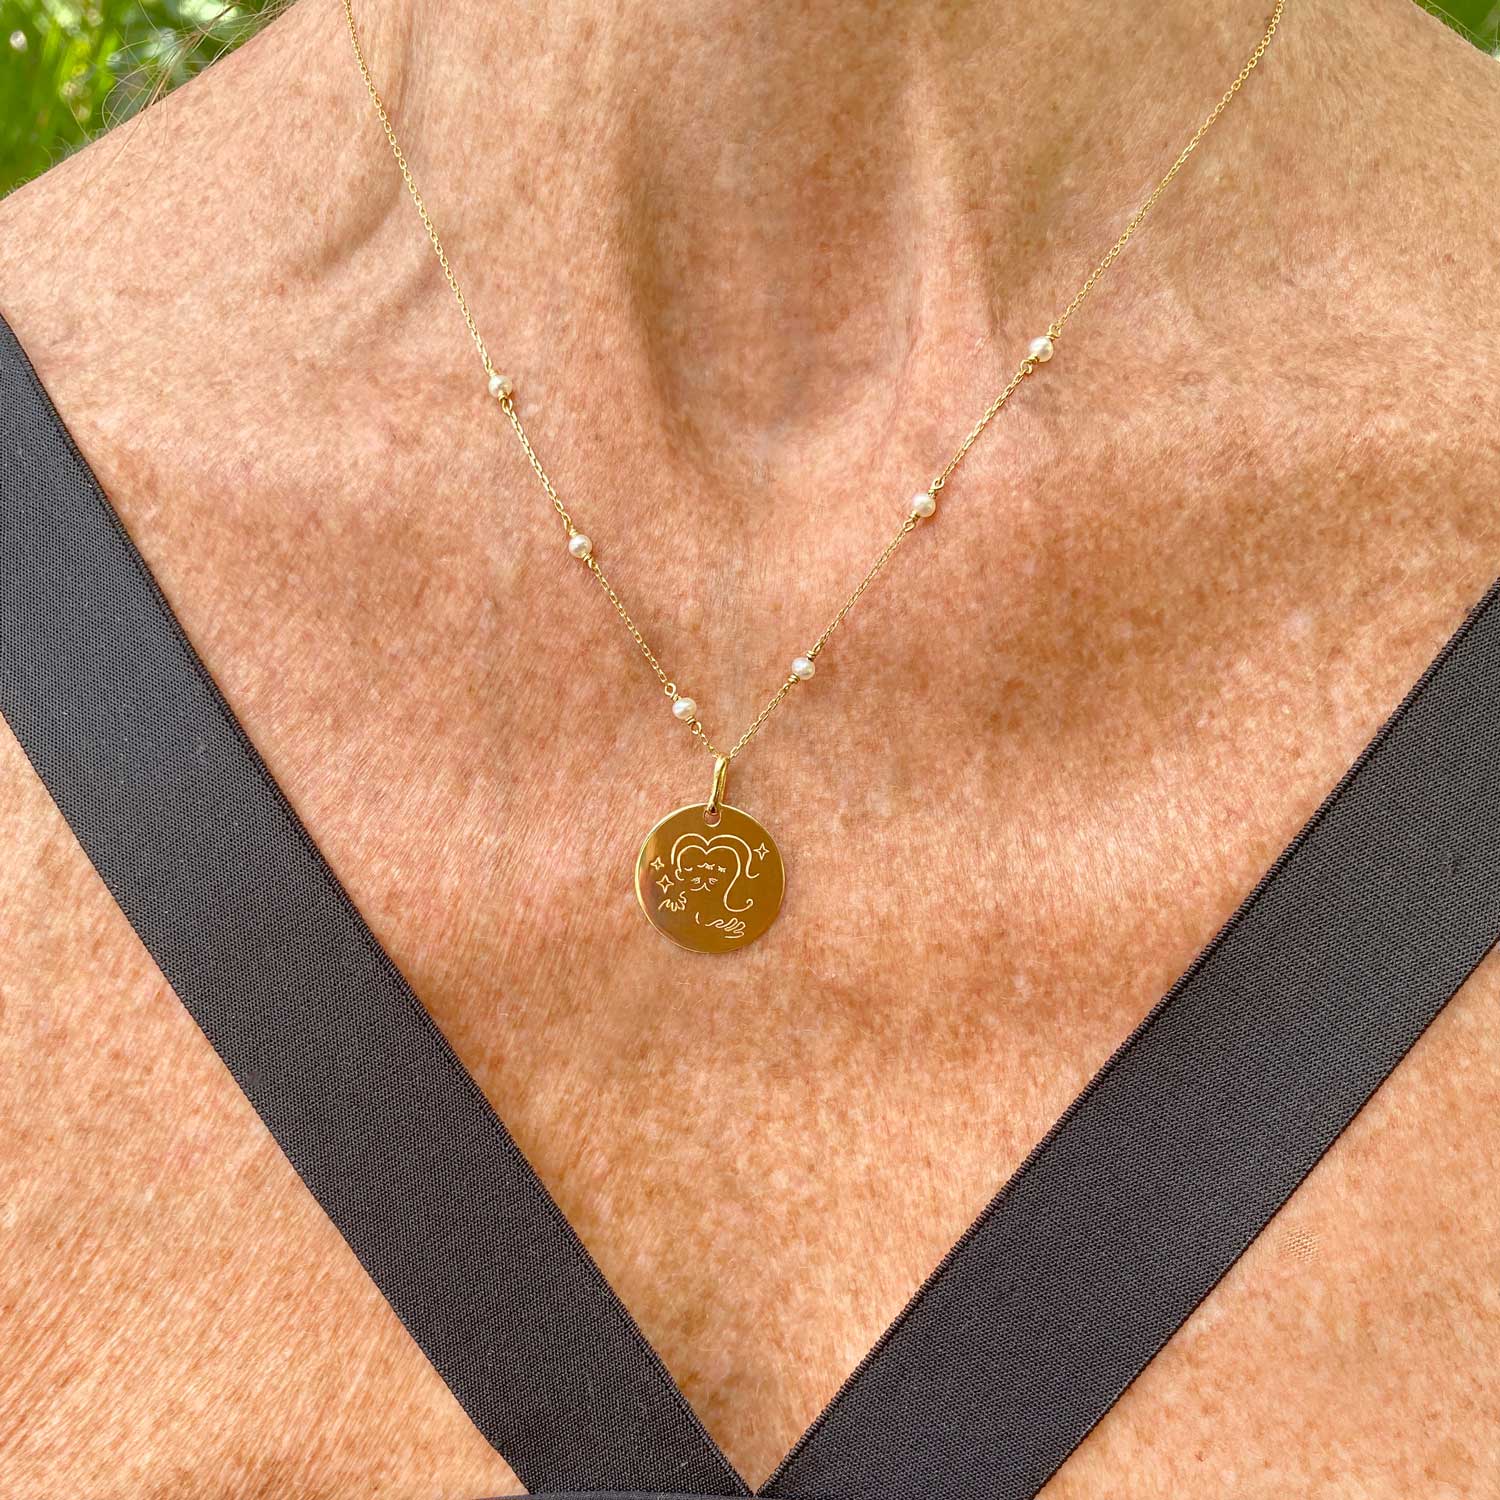 Muze 18k gold vermeil soul medal necklace, art inspired jewelry, dainty talisman symbol of love, friendship, complicity .Meaningful sentimental gift perfect for her,wife girlfriend or as friendship present.